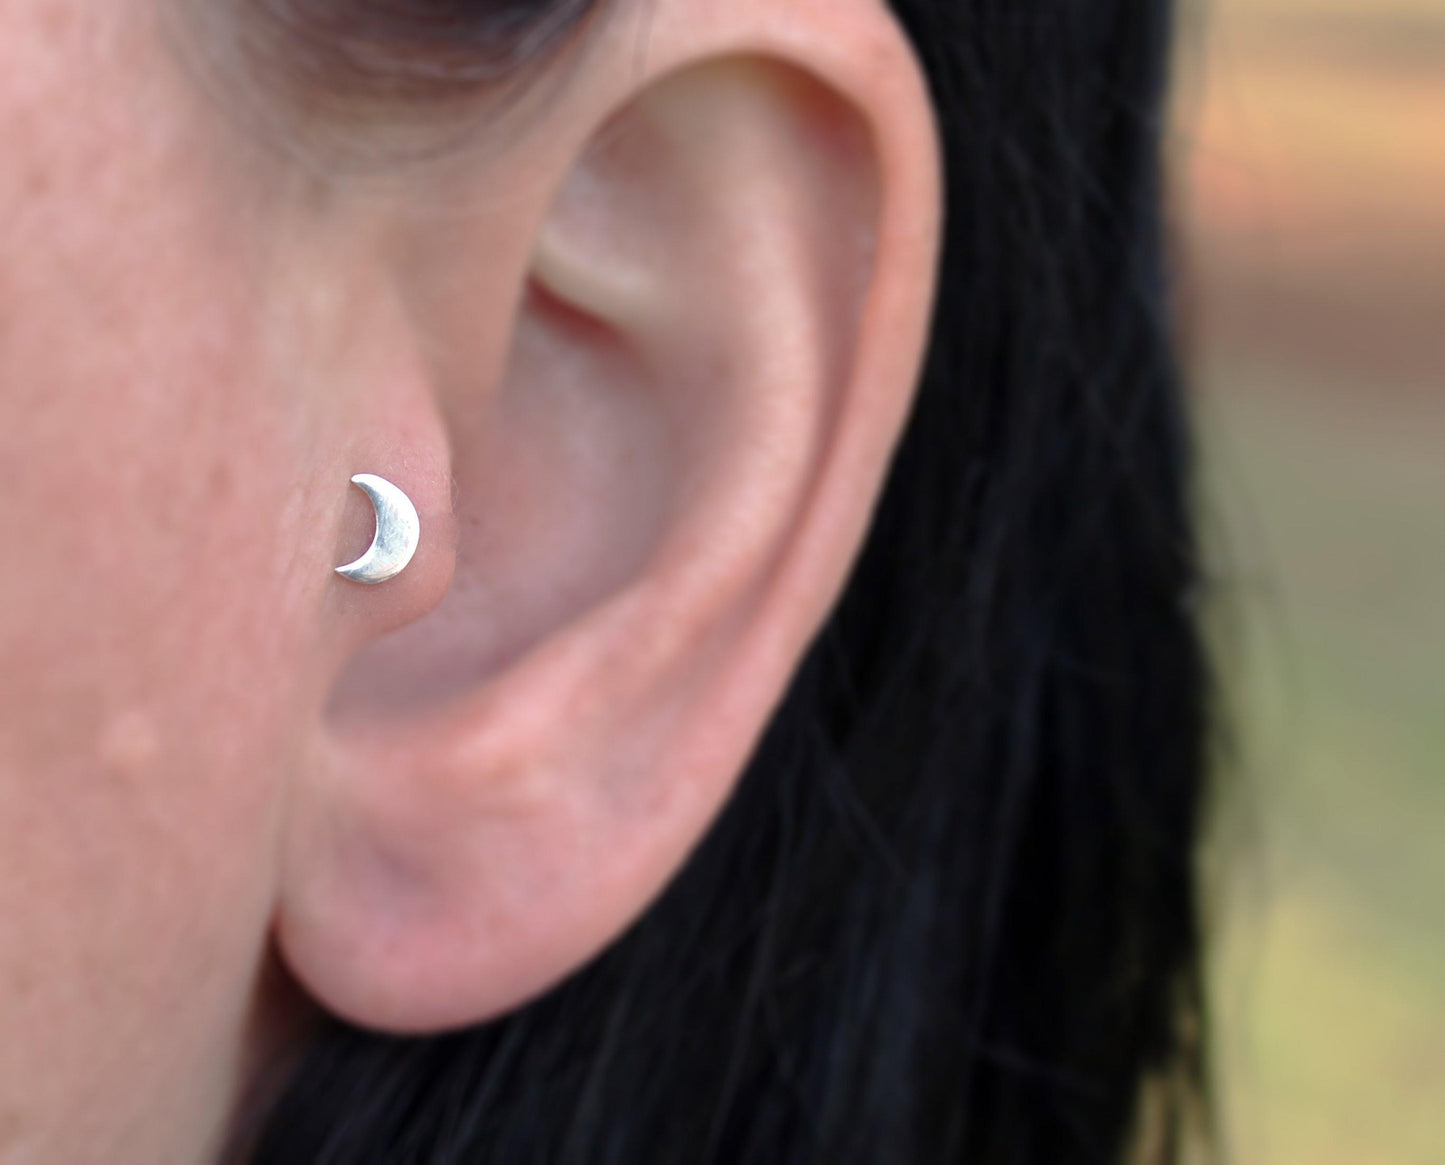 Boho Crescent Moon Tragus Stud, Sterling Silver Labret Earring - Sweet November Jewelry